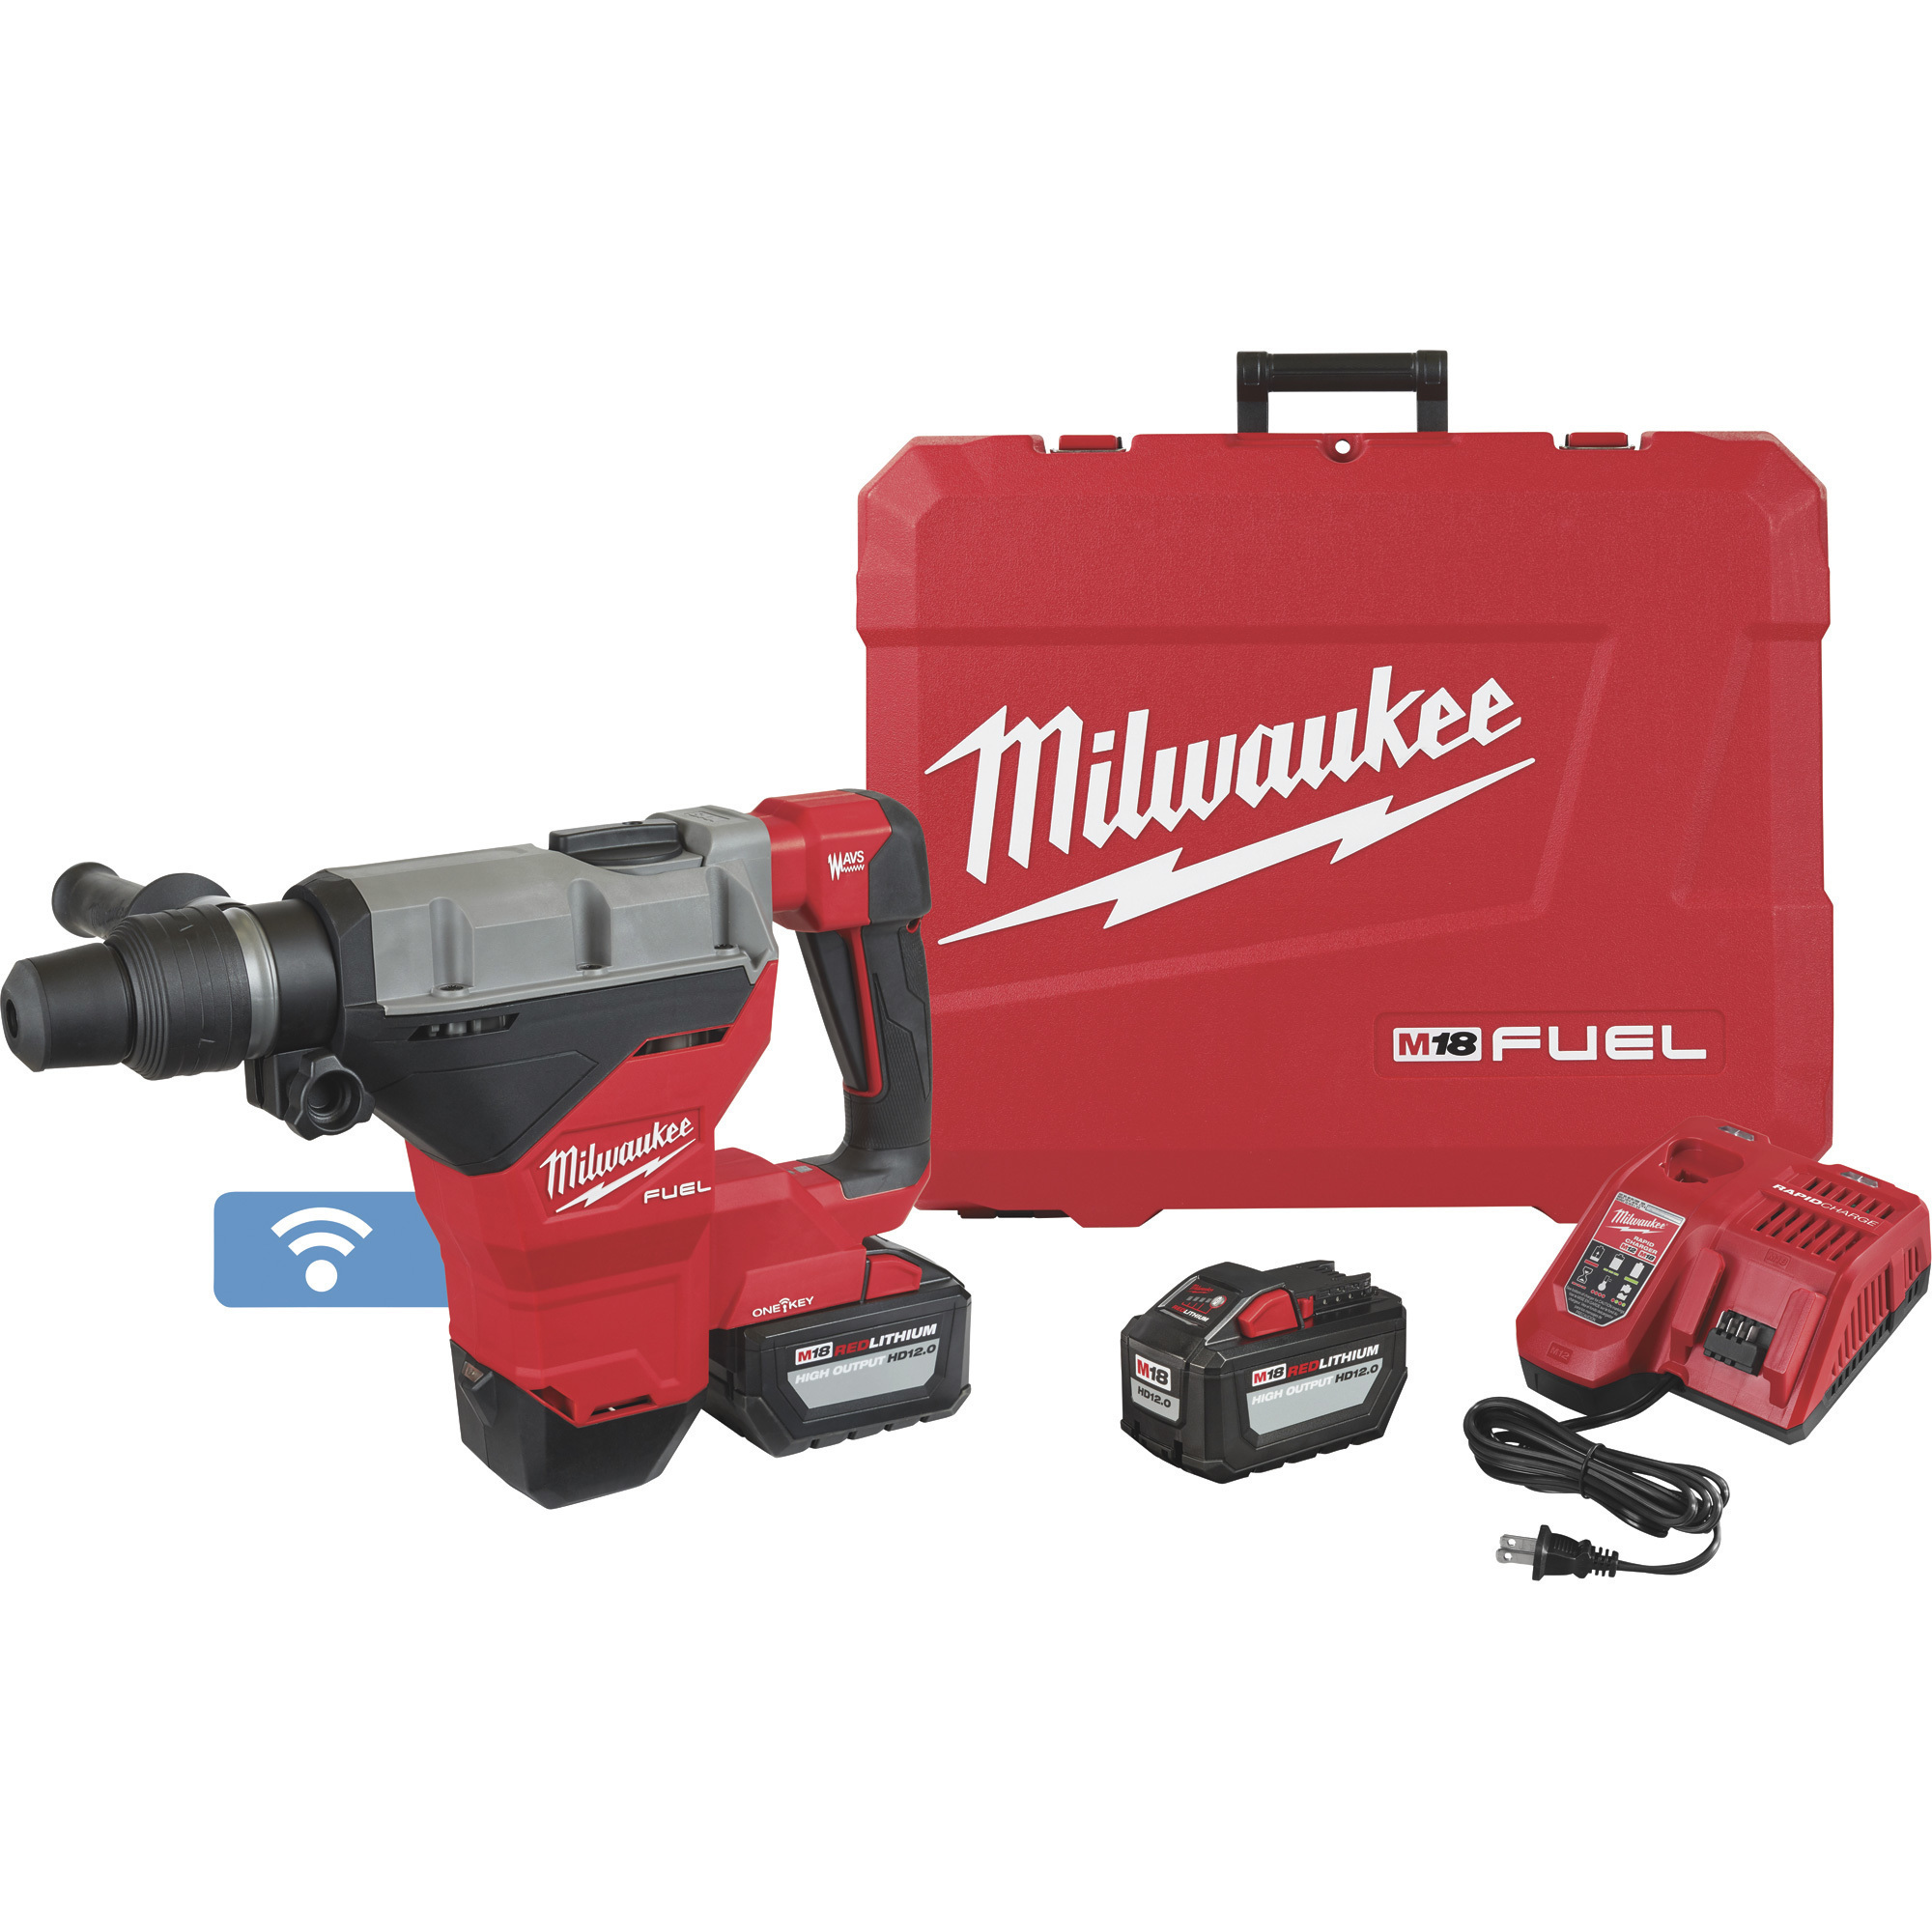 Milwaukee M18 FUEL SDS Max Rotary Hammer with One Key Kit, 2 Batteries, 1 3/4Inch Chuck, 8.1 Ft./Lbs., 380 RPM, 2900 BPM, Model 2718-22HD